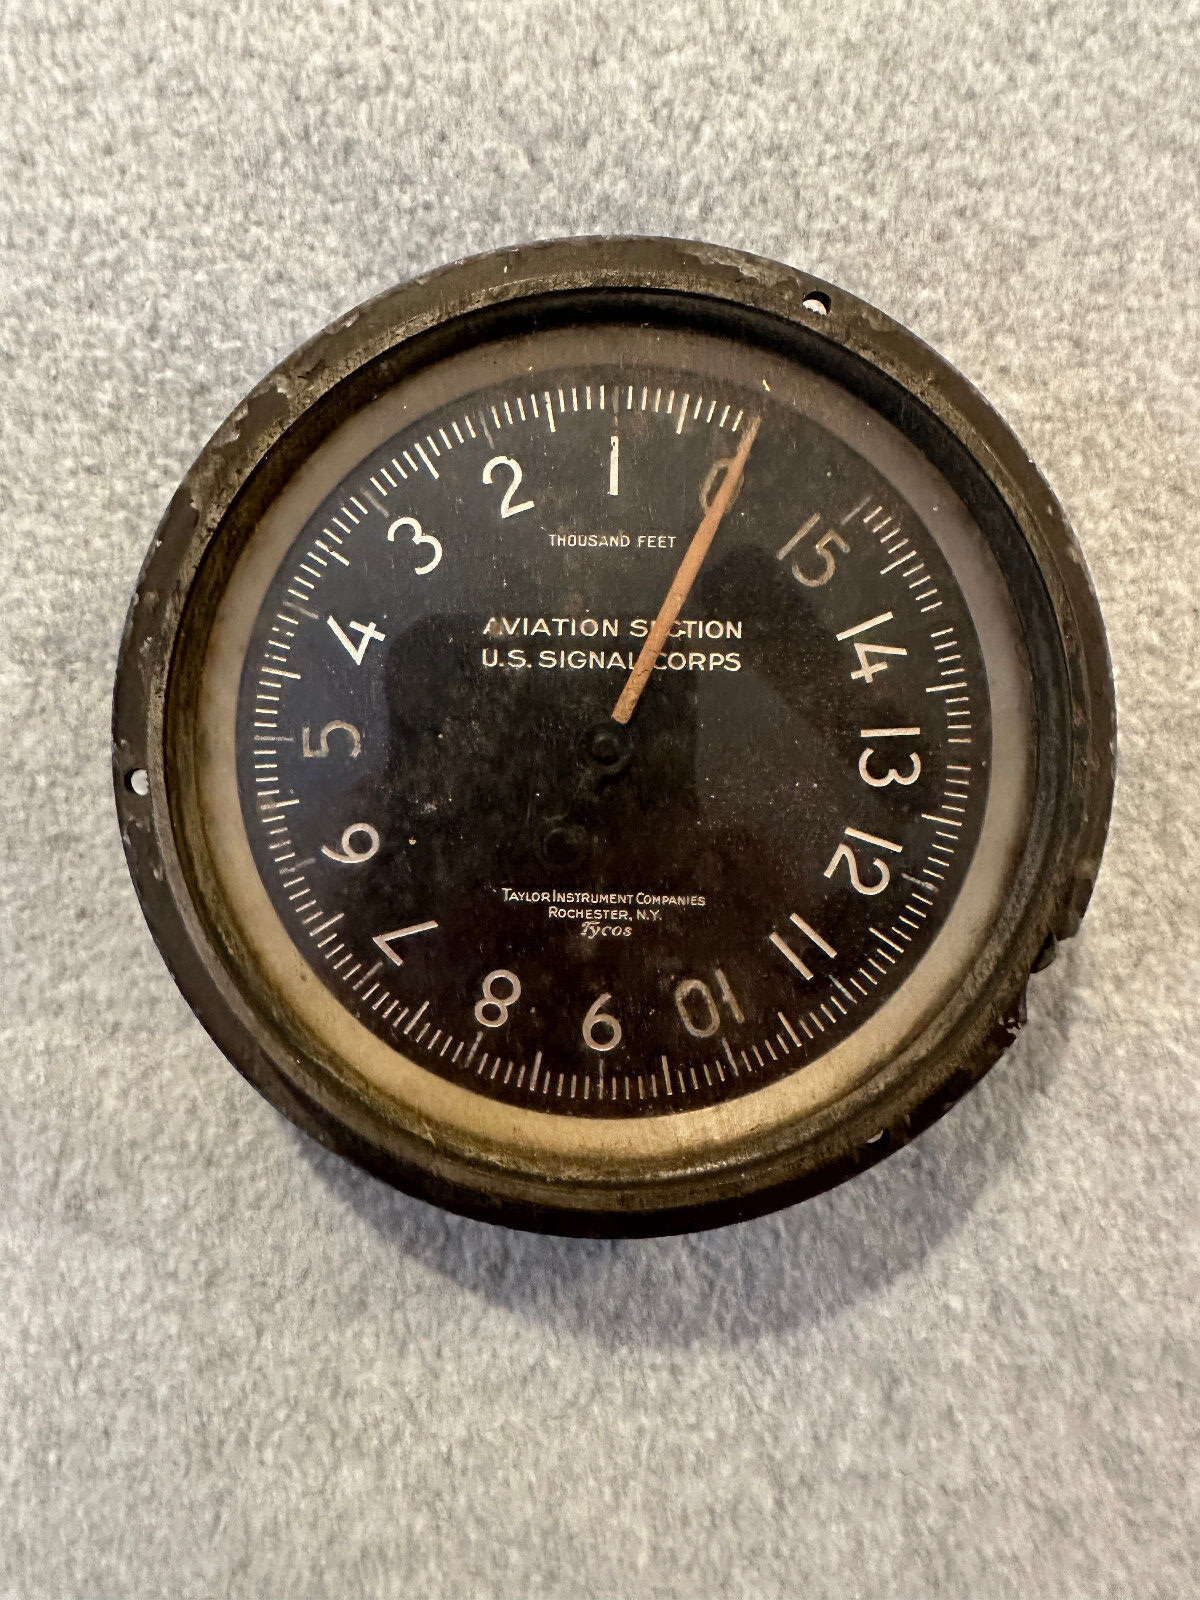 WW 1 US SIGNAL CORP ALTIMETER 15000 FT BY TEXAS INSTRUMENT MODEL 2081-A